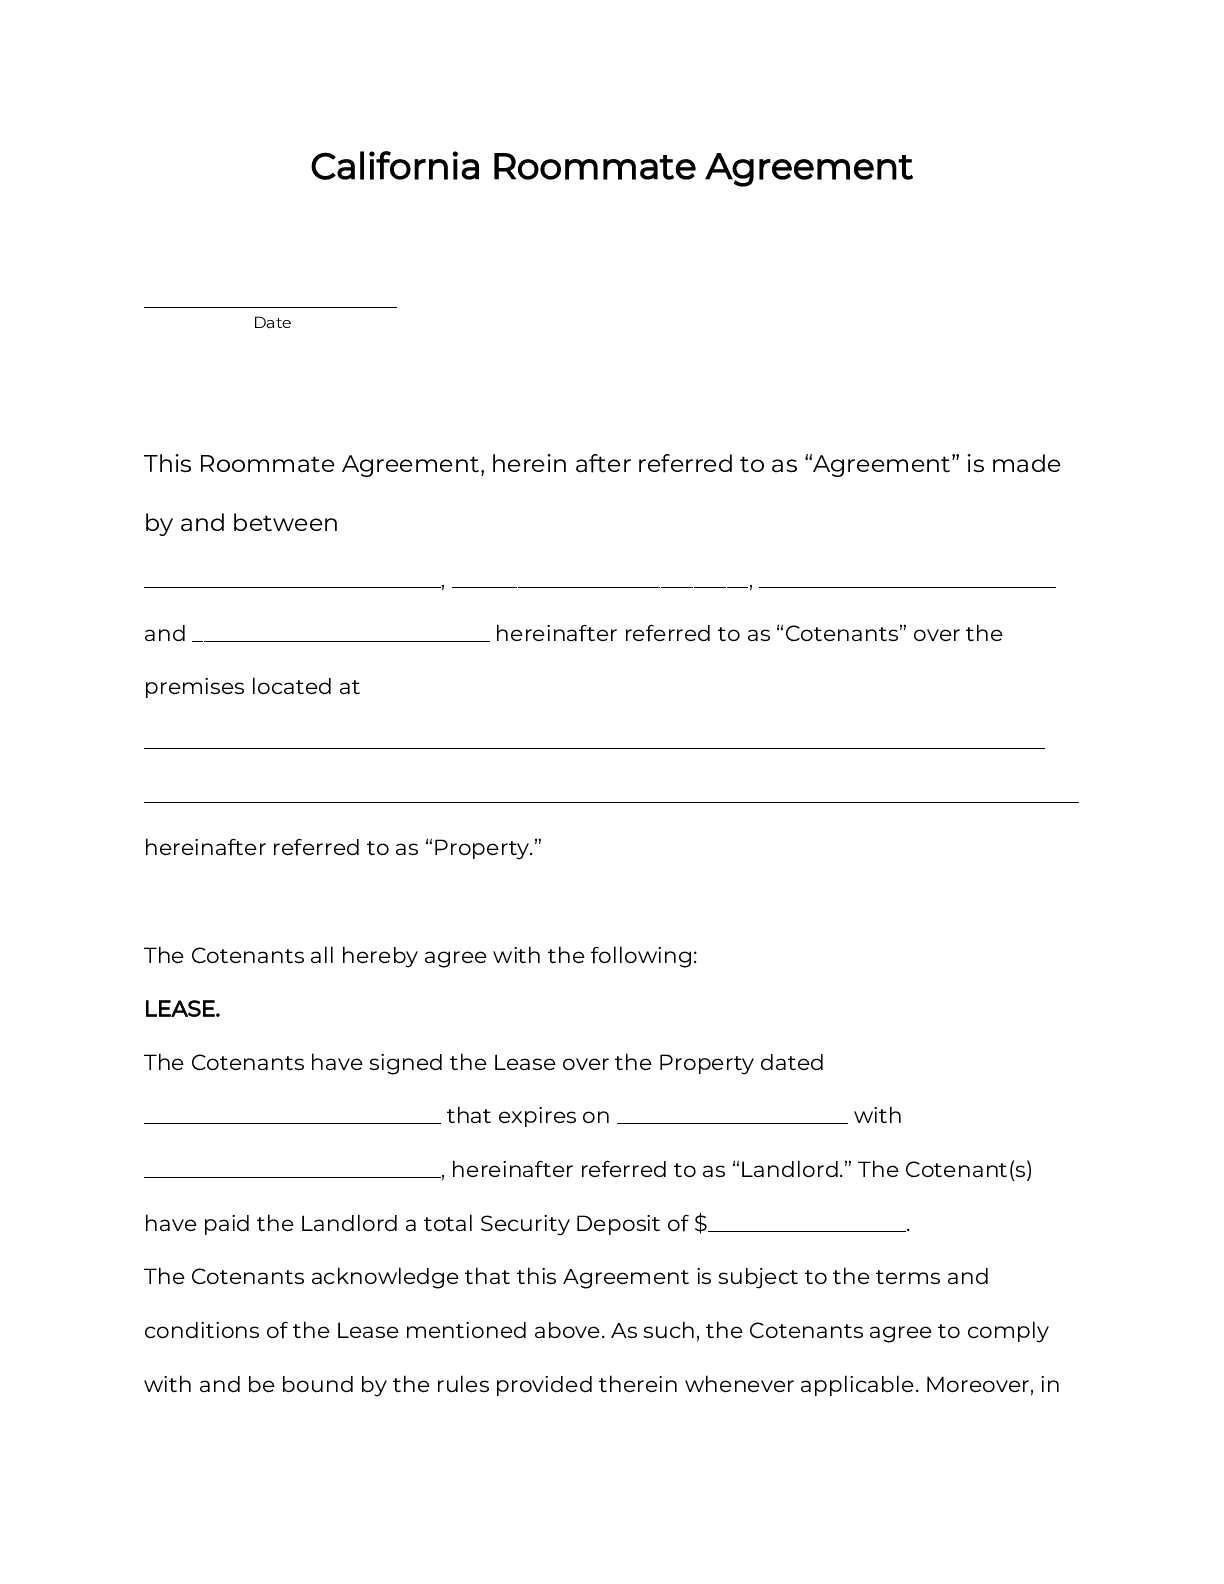 OFFICIAL California Room Rental Agreement: Roommate Form [20]  PDF Throughout termination of lodger agreement template